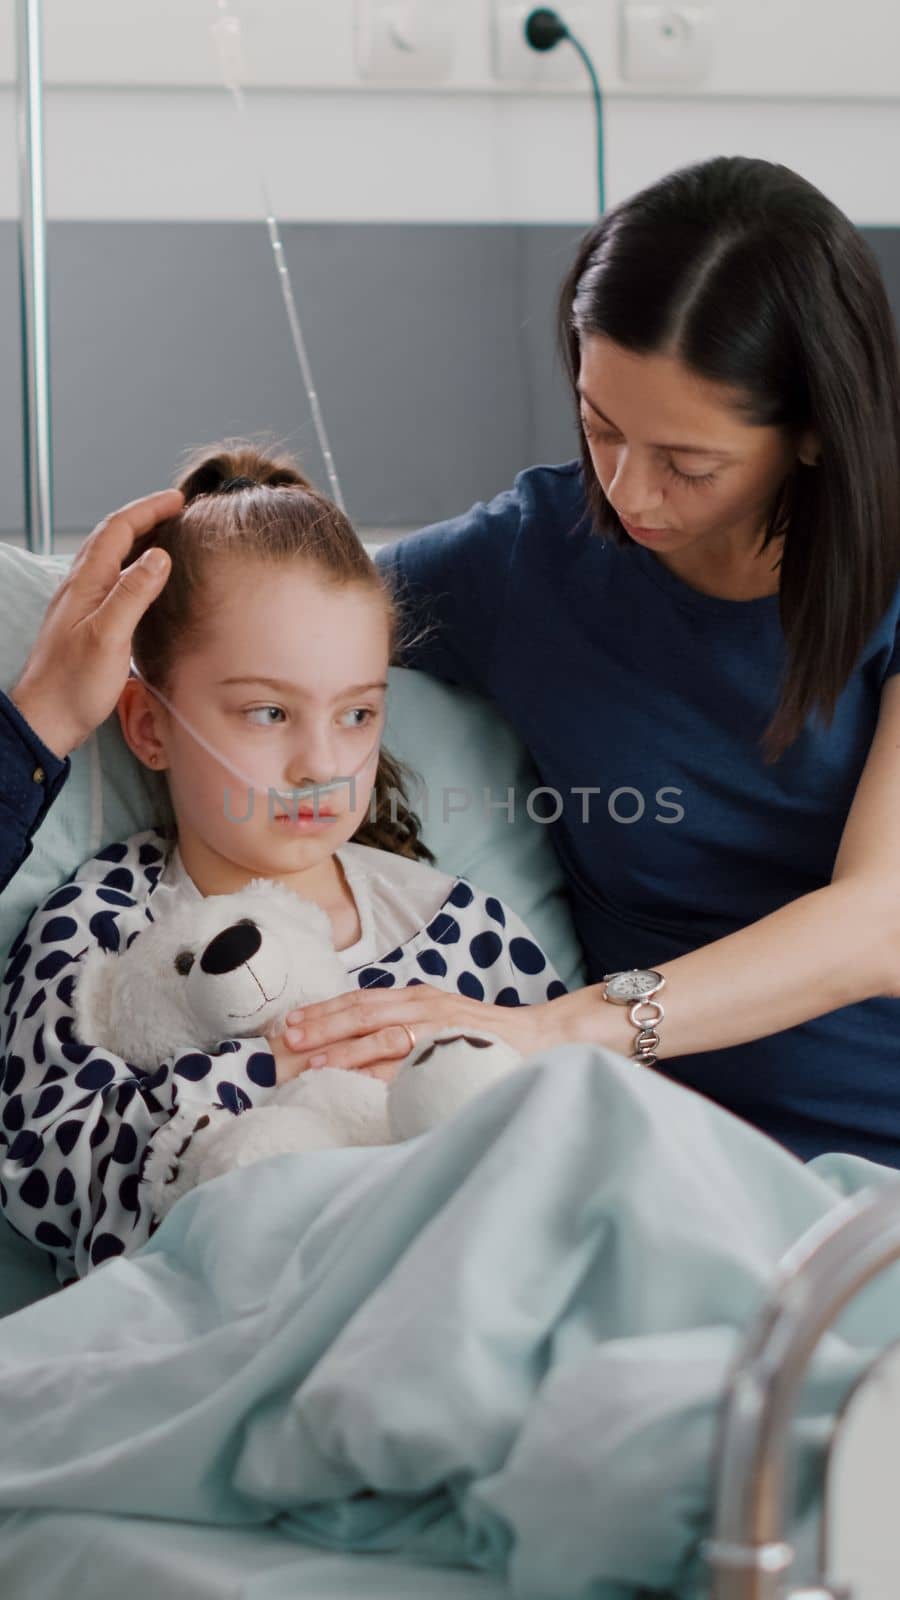 Sick daughter with oxygen nasal tube resting in bed after suffering sickness infection surgery during healthcare examination in hospital ward. Worried parents explaining medication treatment